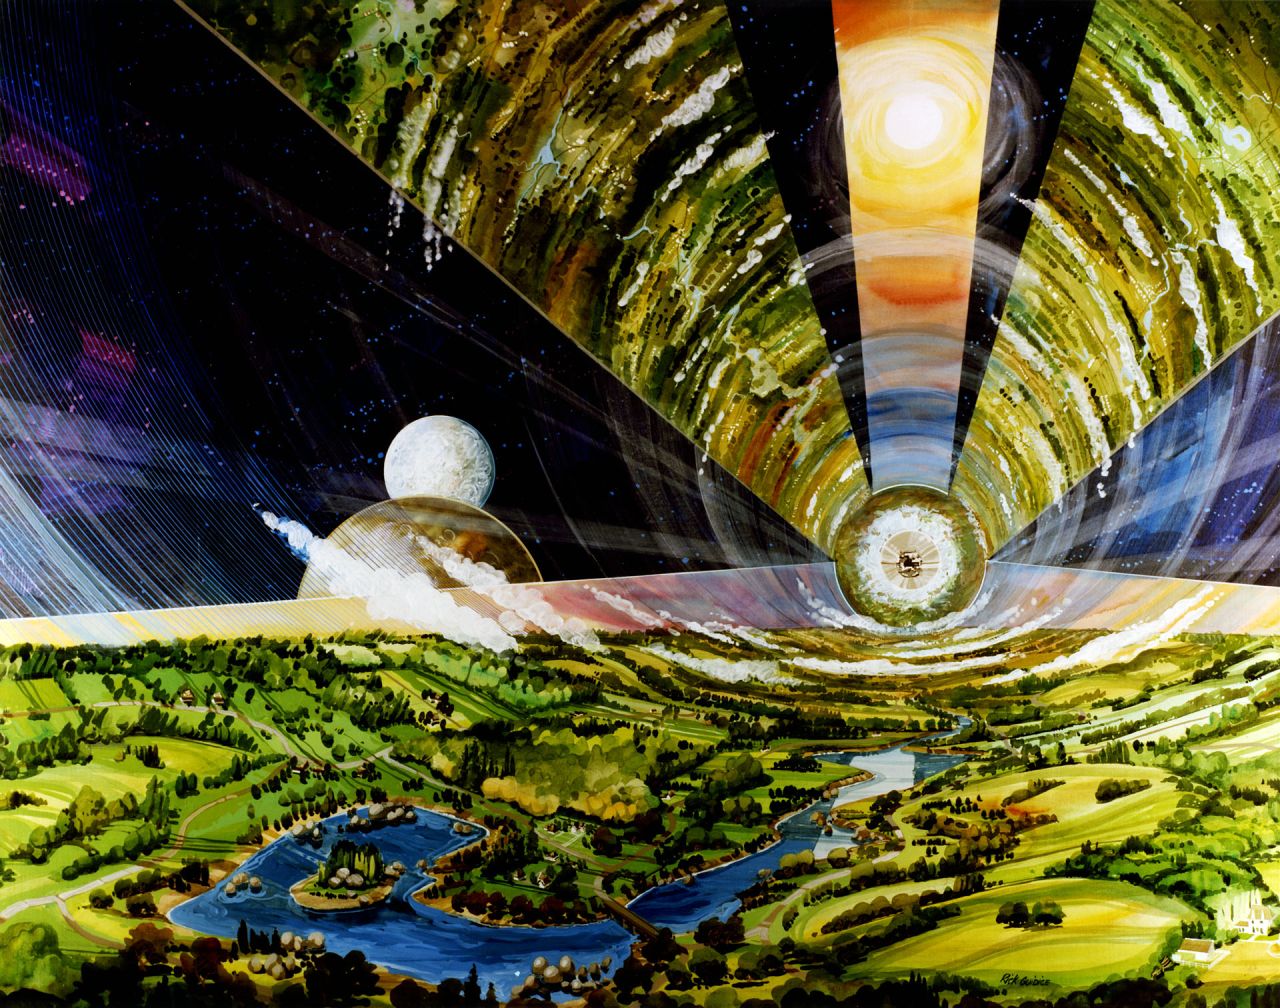 The Cylindrical Colony, the most spacious of O'Neill's concepts, had huge windows fitted to allow light to filter through to the landscapes within. The design, later dubbed the 'O'Neill Cylinder', was riffed on in Christopher Nolan's intergalactic blockbuster "<a href="https://www.youtube.com/watch?v=LRT0GGTWYnM" target="_blank" target="_blank">Interstellar</a>" forty years later.